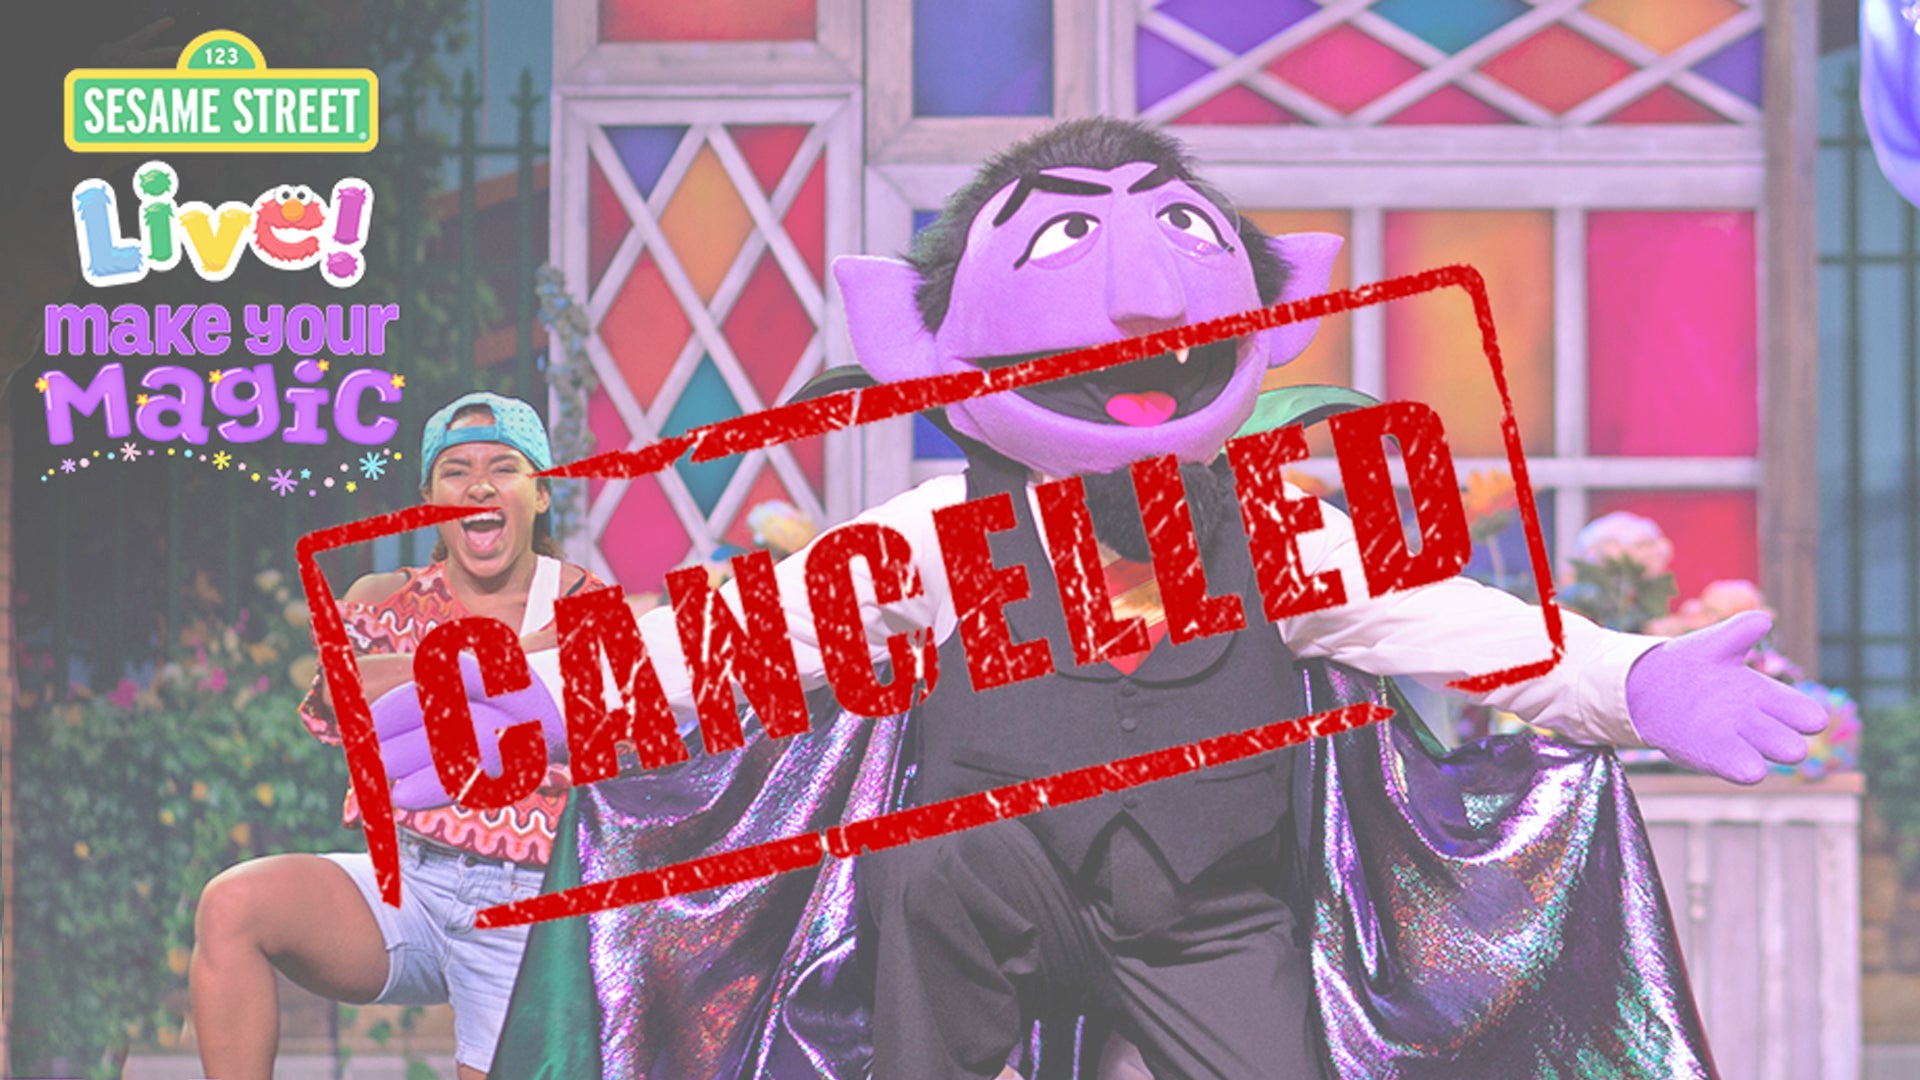 Sesame Street Live! Make Your Magic - CANCELLED